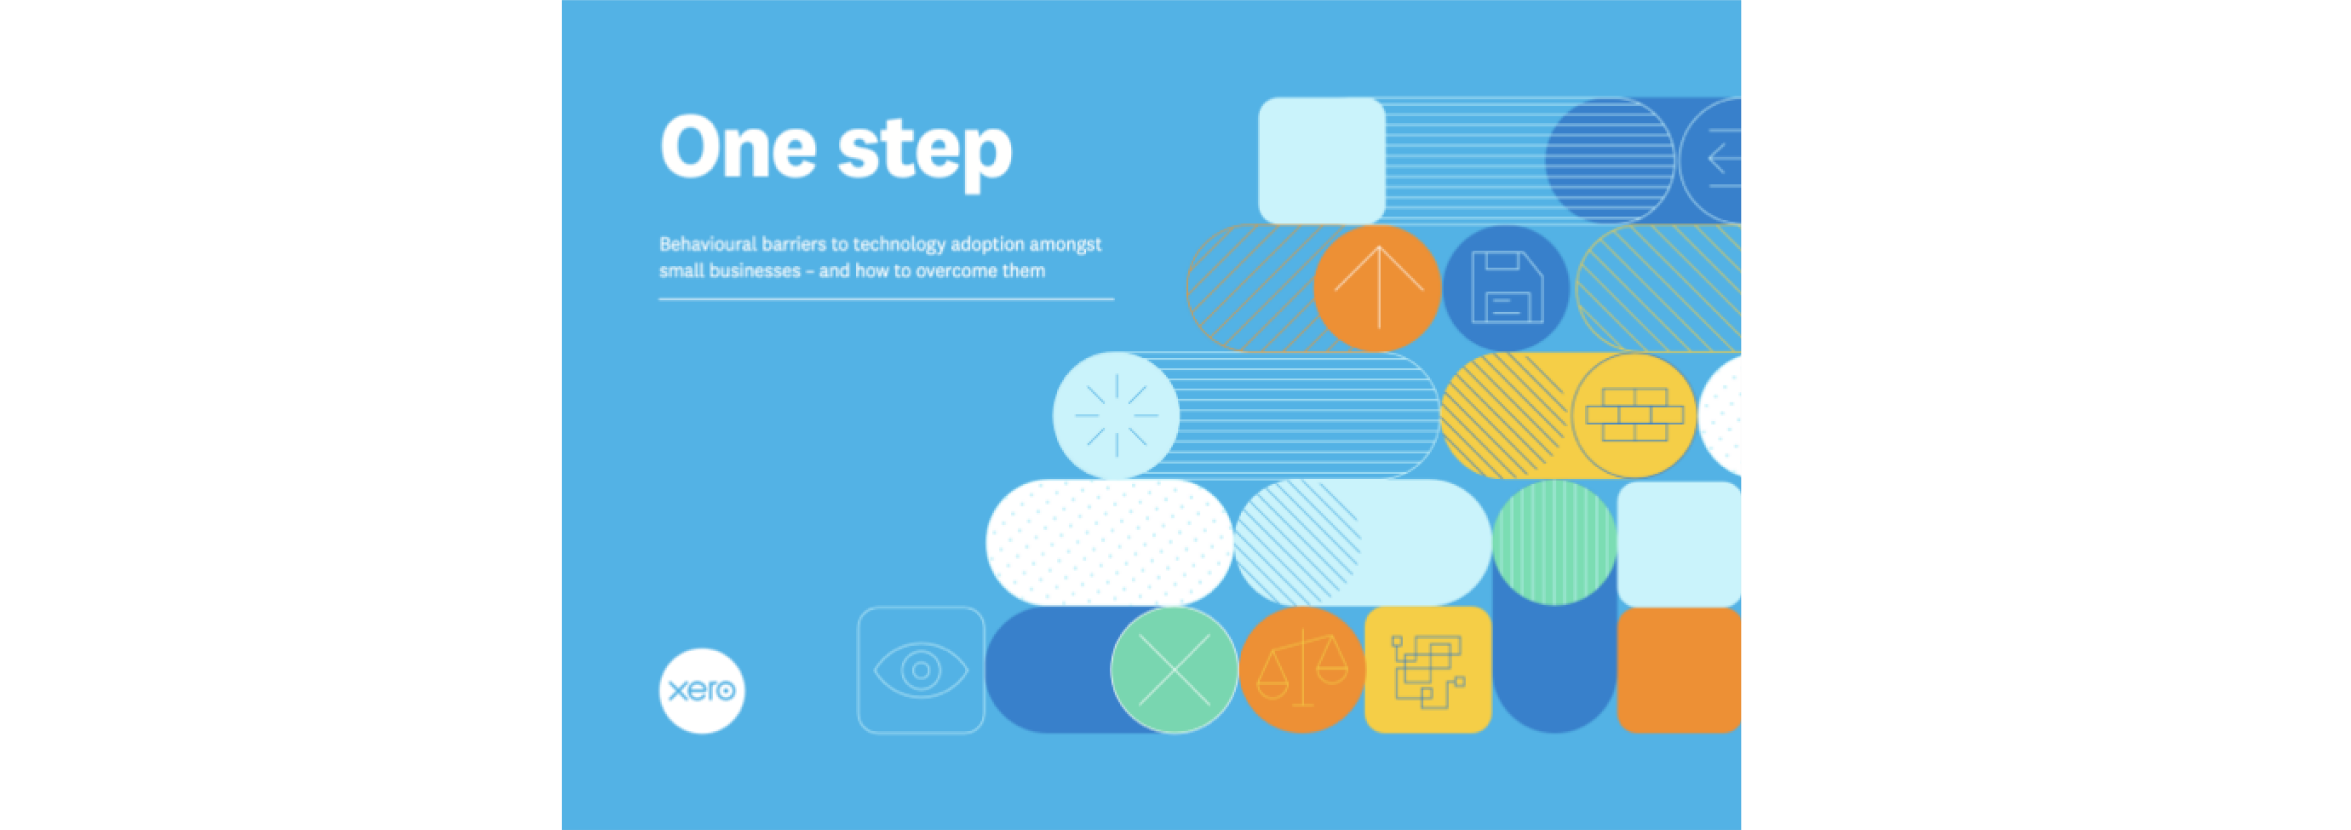 The cover of Xero’s One Step report investigating behavioural barriers to technology adoption amongst small businesses.